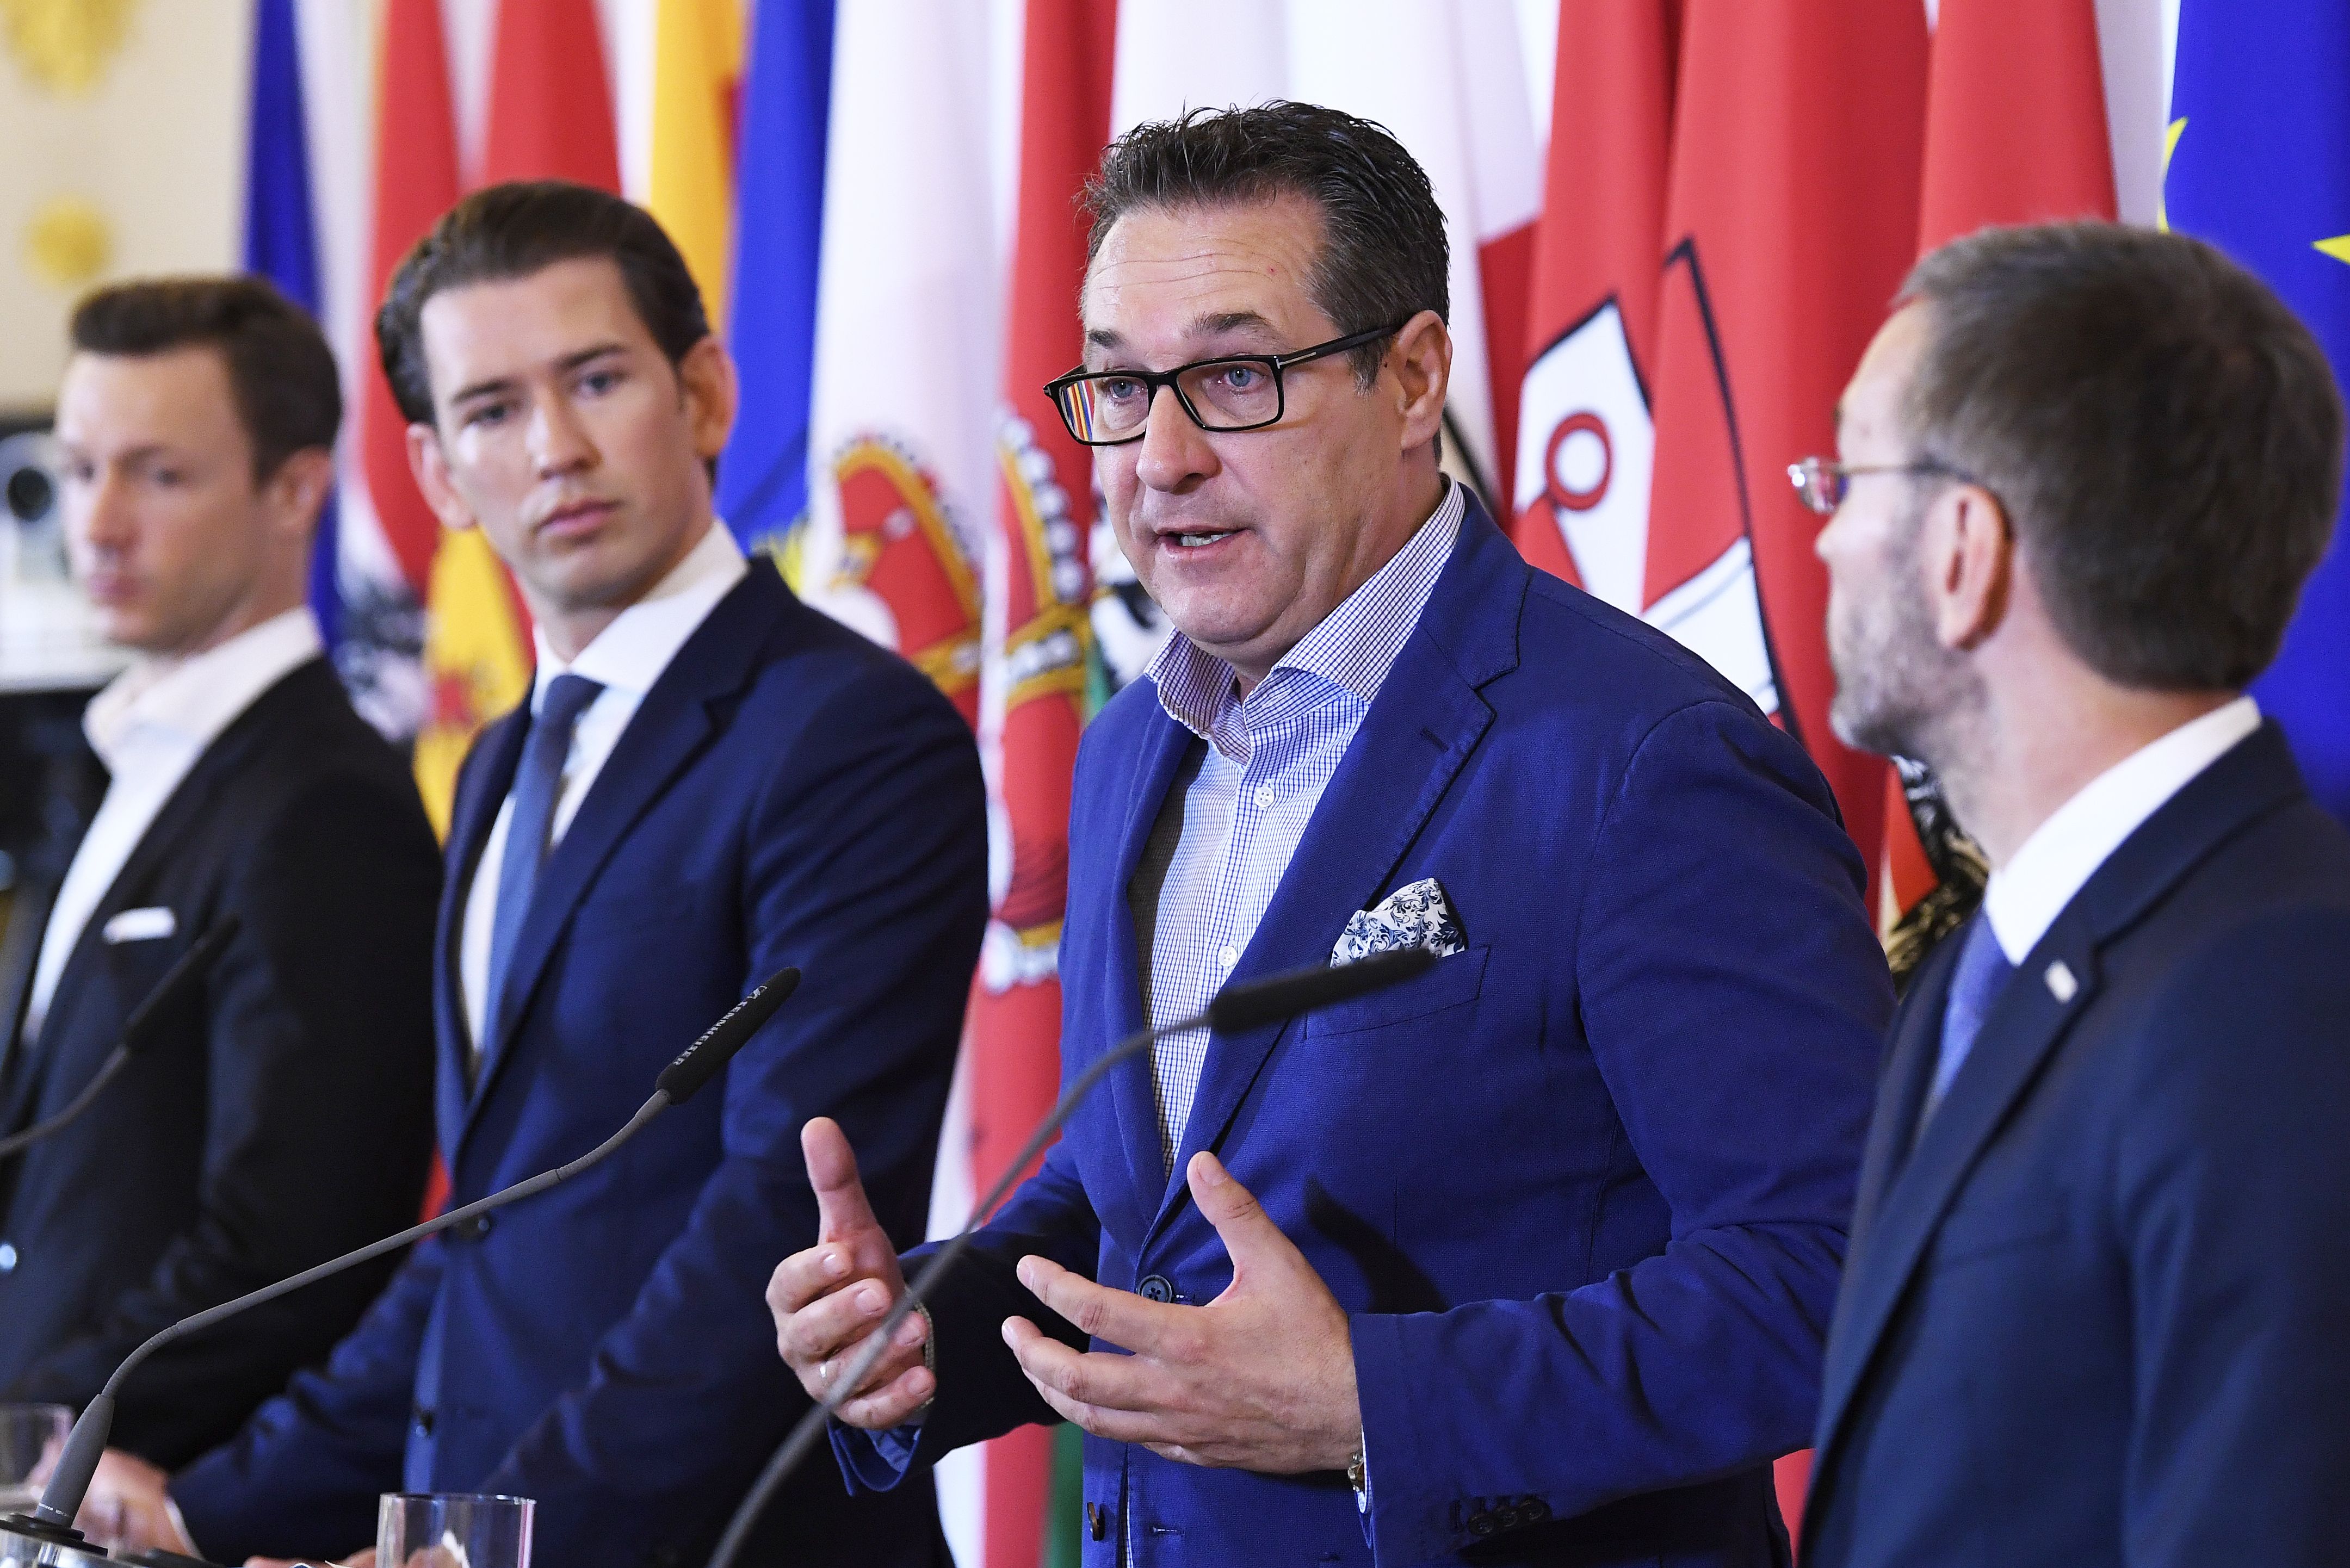 (L-R) Austrian Chief of Staff Gernot Bluemel (ÖVP), Austrian Chancellor Sebastian Kurz (ÖVP), Vice-Chancellor Heinz-Christian Strache (FPÖ) and Interior Minister Herbert Kickl (FPÖ) give a press conference on June 8, 2018 in Vienna, to announce the government could expel up to 60 Turkish-funded imams and their families and shut down seven mosques as part of a crackdown on "political Islam". - In total 150 people risked losing their right to residence, he said at a press conference in Vienna. (Photo by ROBERT JAEGER / APA / AFP) / Austria OUT (Photo credit should read ROBERT JAEGER/AFP/Getty Images)